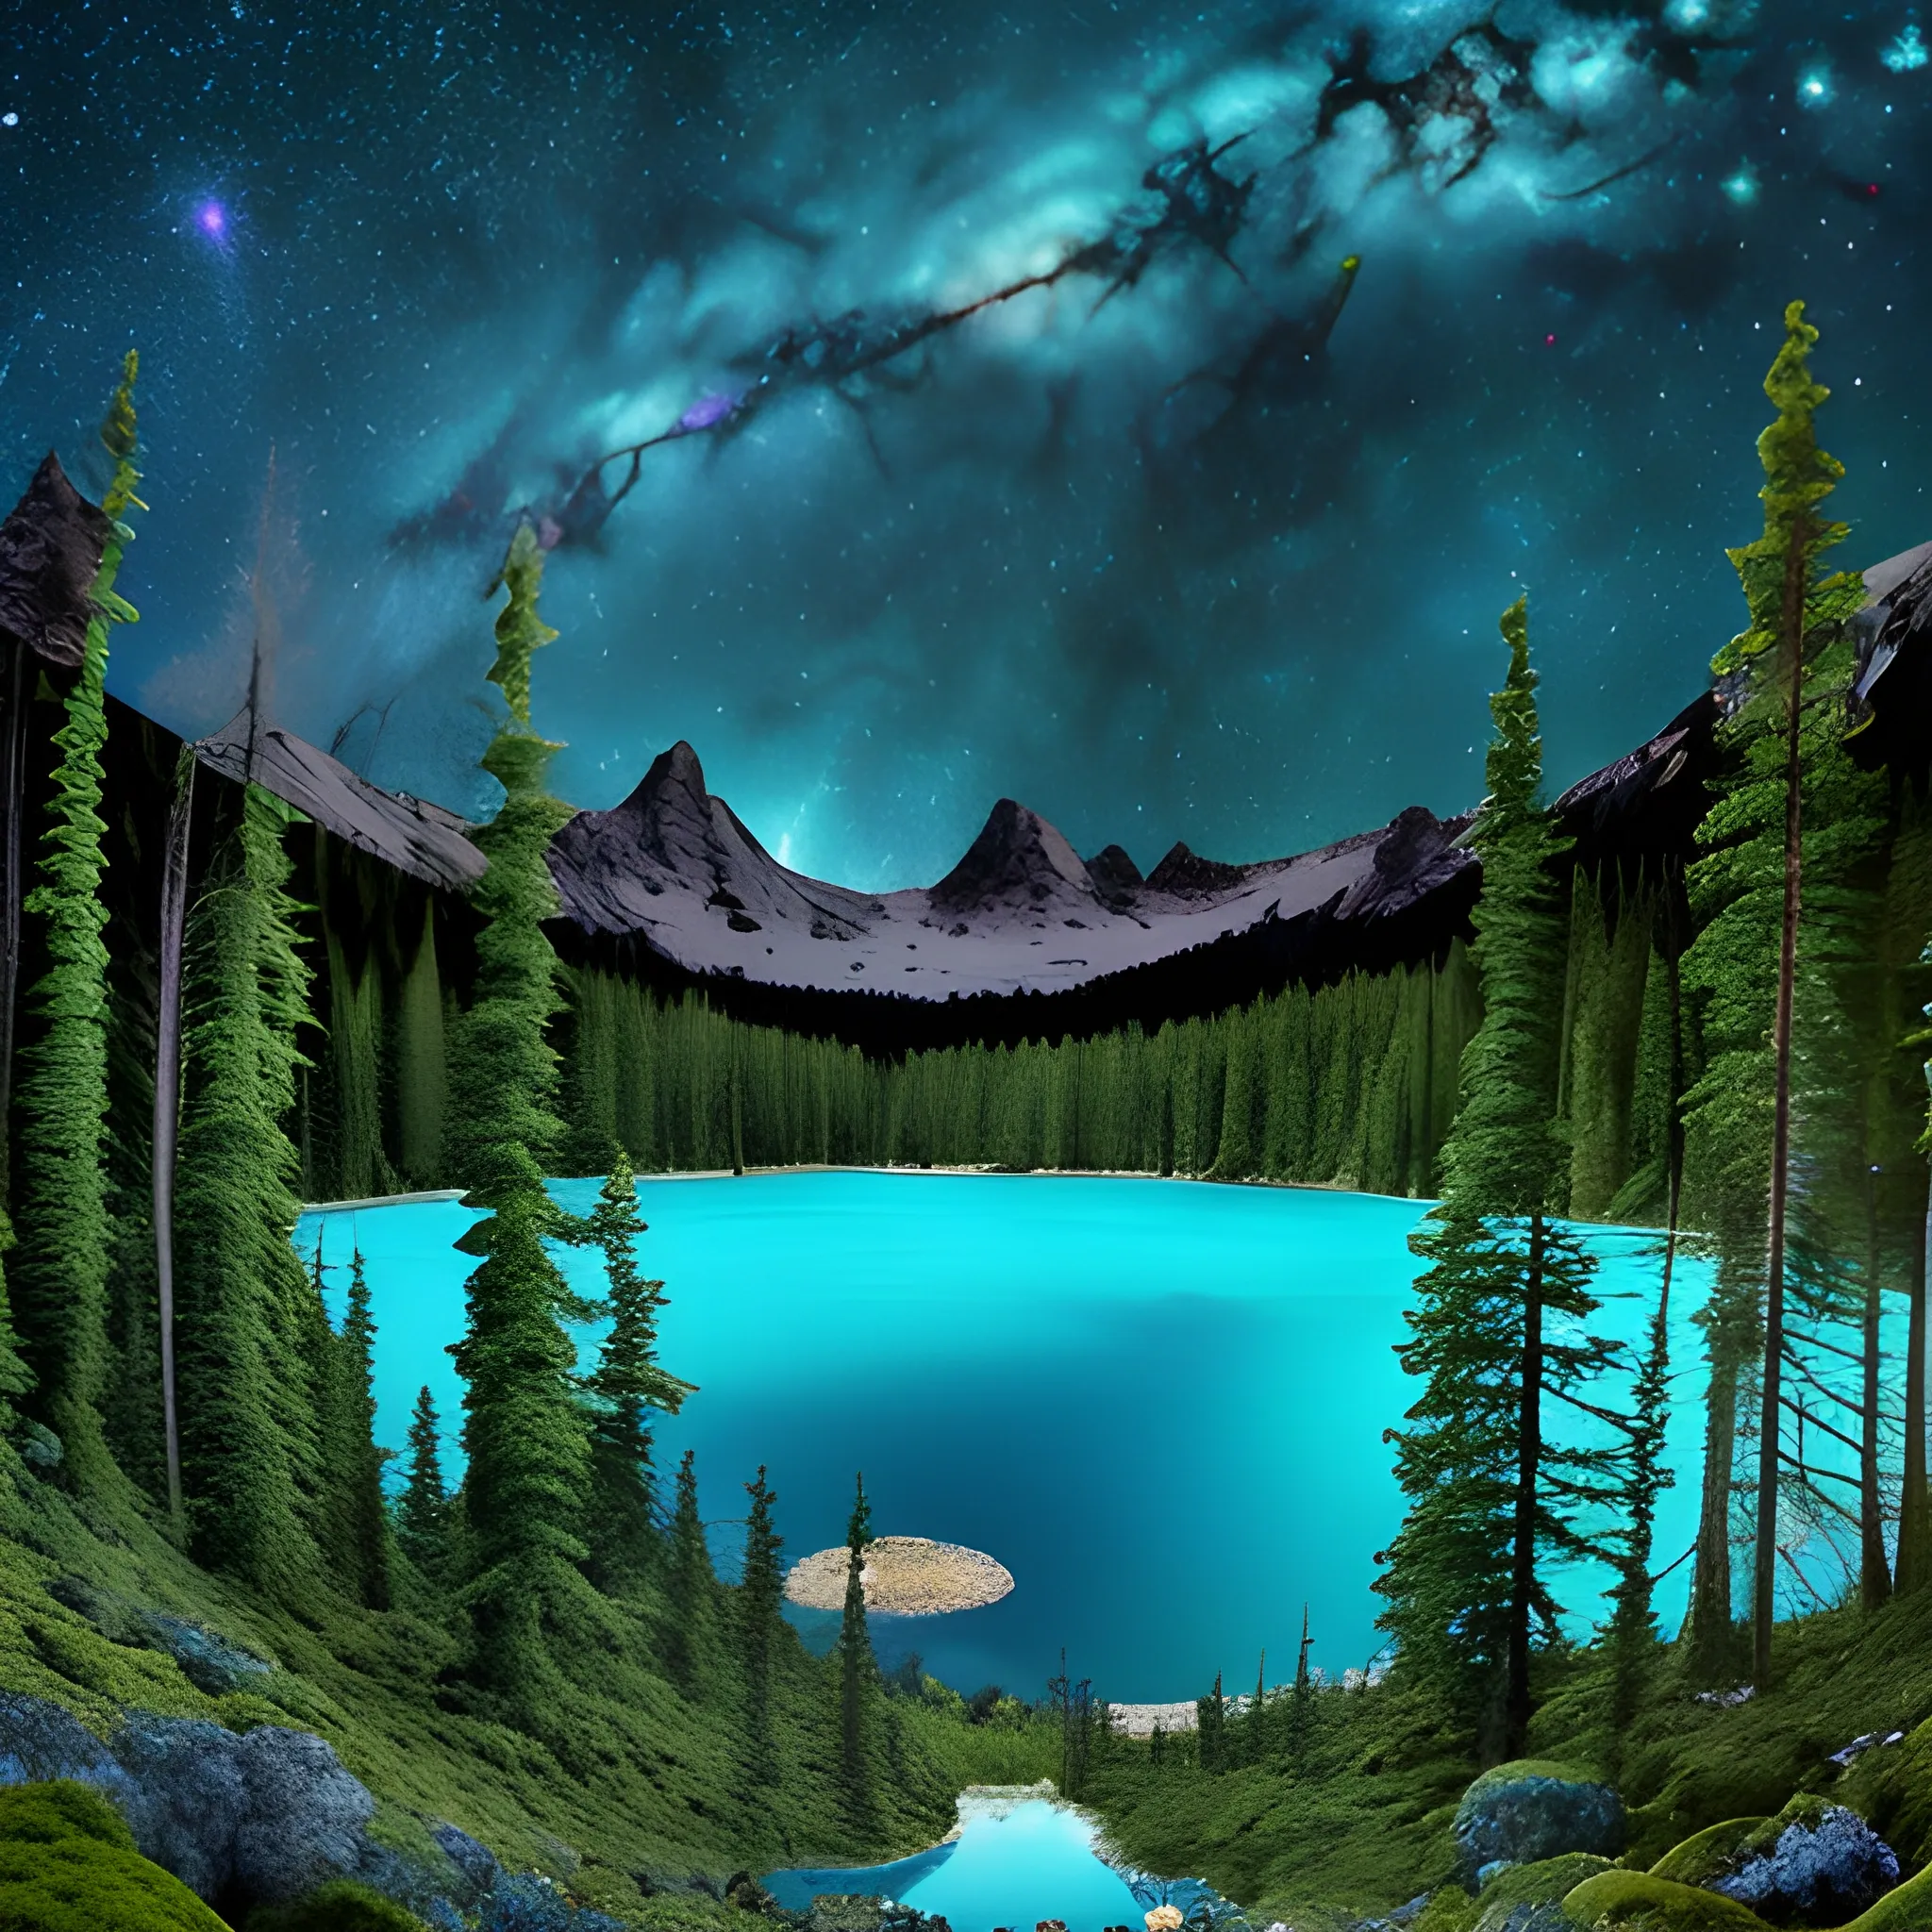 turquoise lake surrounded by trees covered with millennial moss, starry sky with galaxies and spaceships crossing space in the background